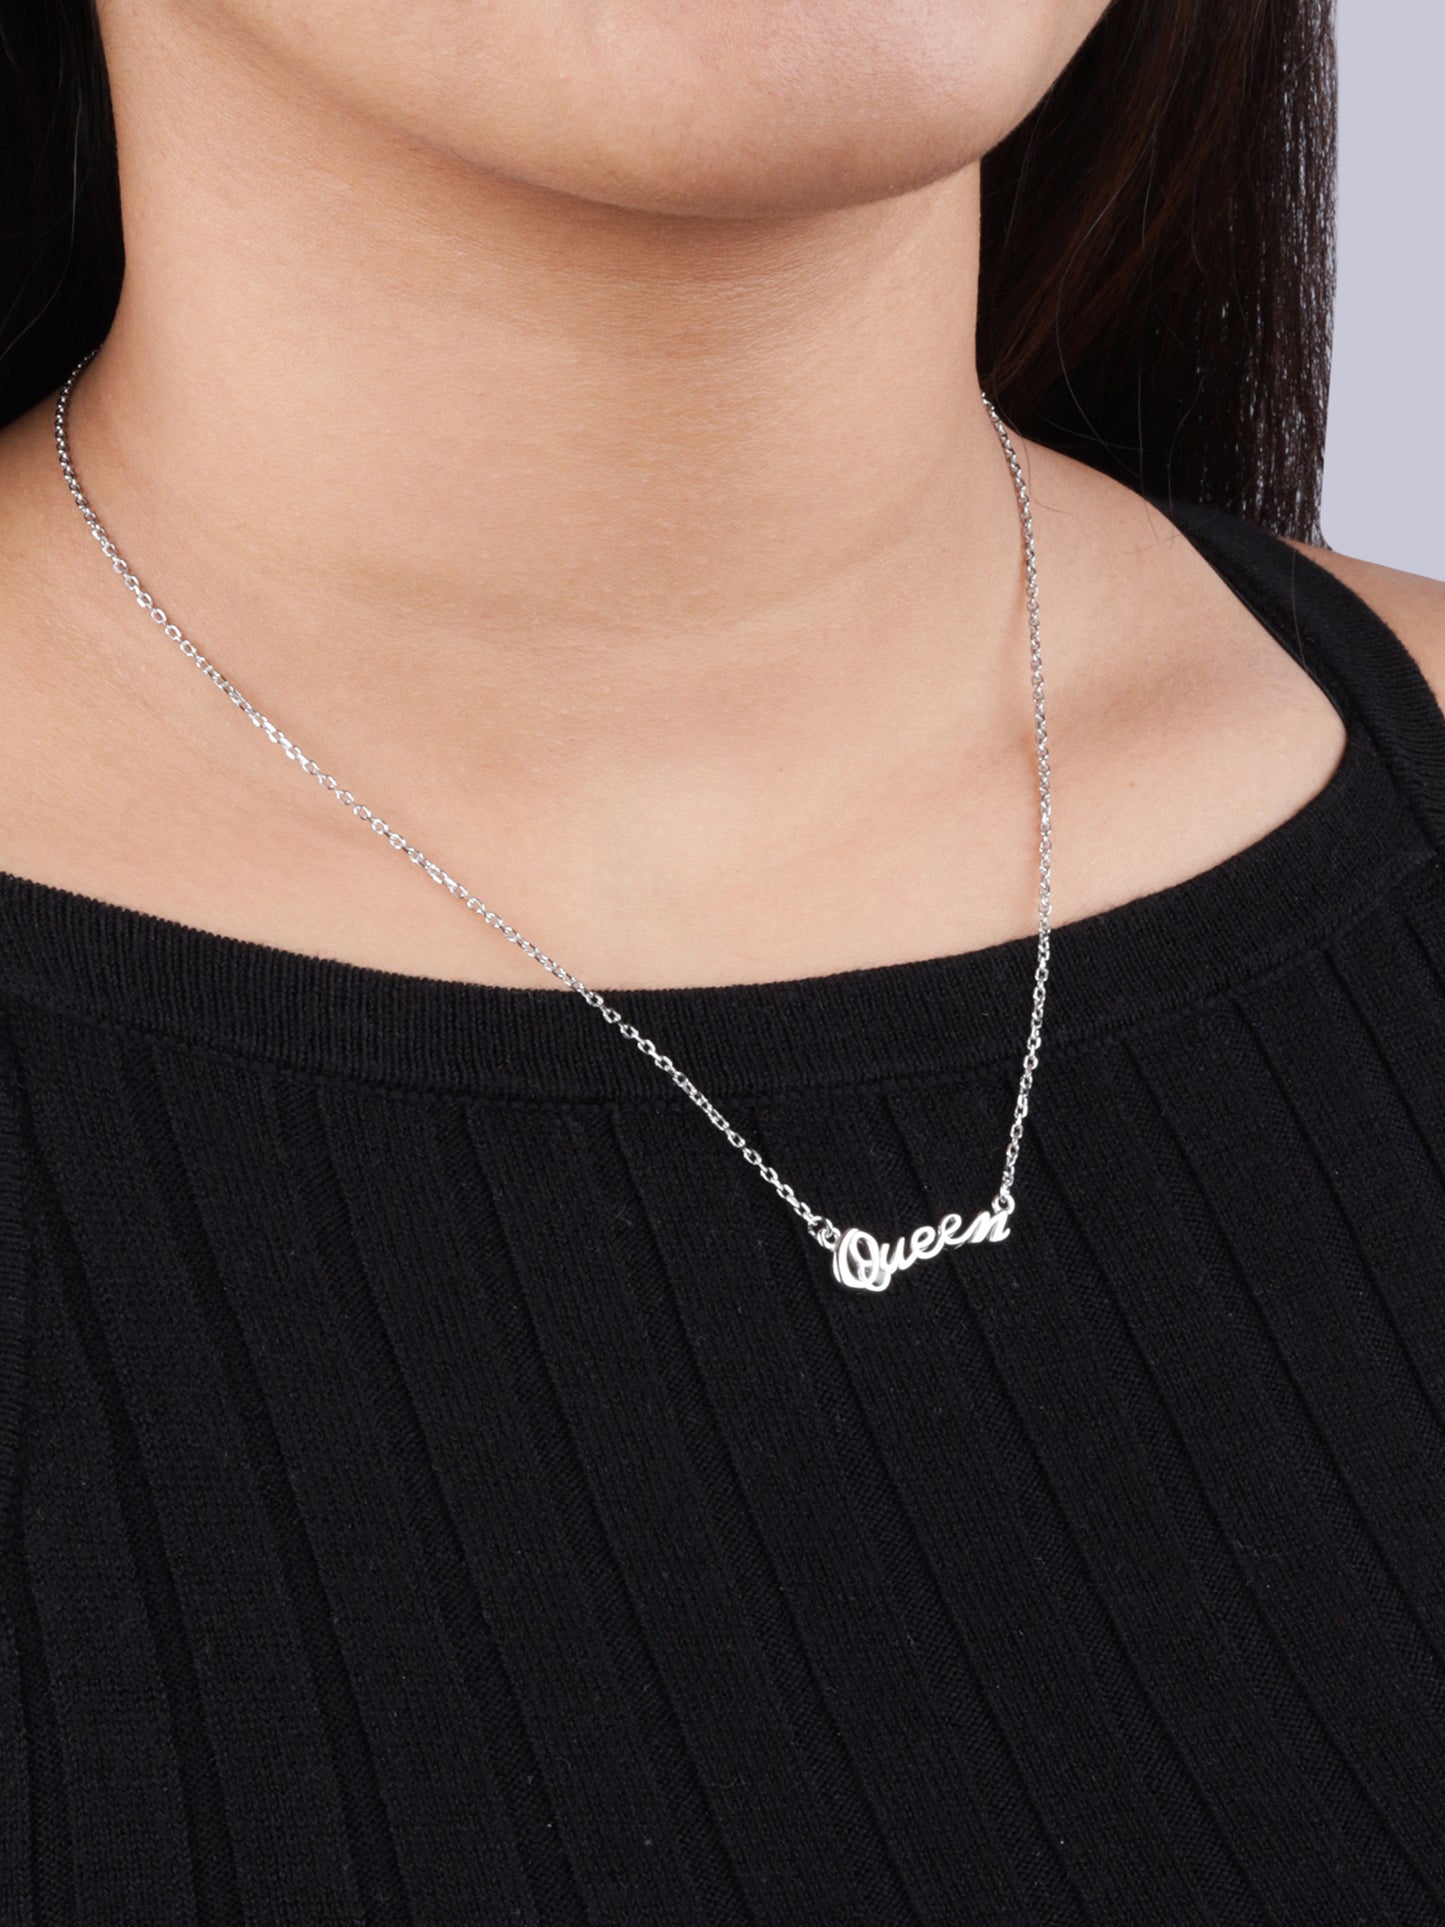 925 Sterling Silver Queen Pendant Necklace